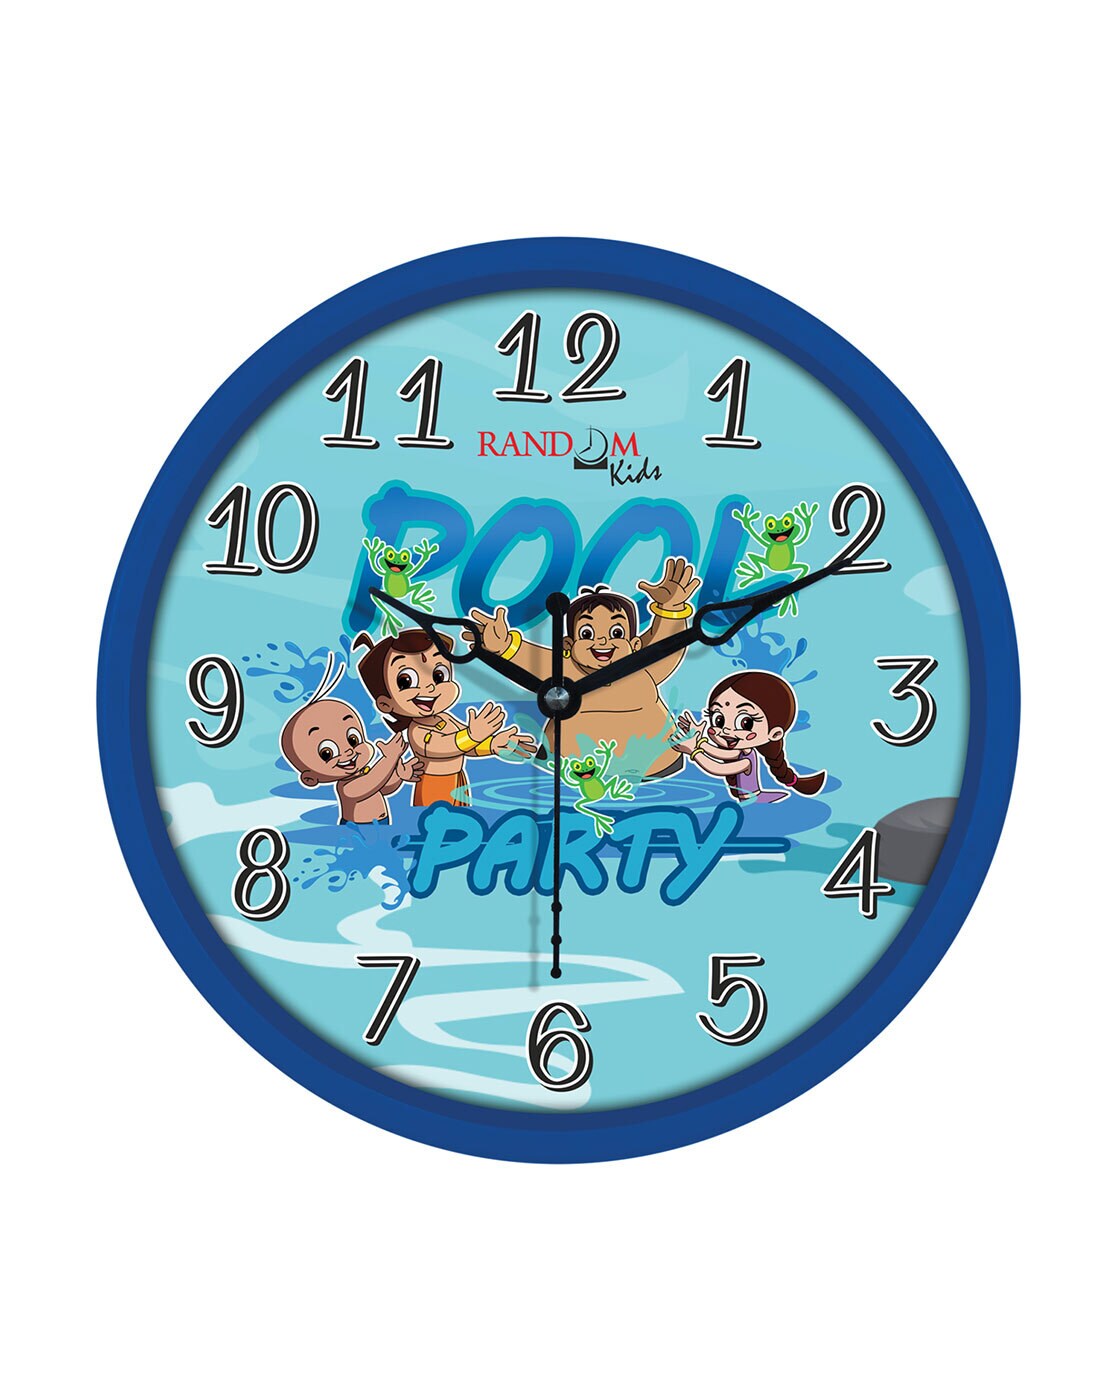 Chhota bheem watch kids toys for boys toys robot toys - Buy Chhota bheem  watch kids toys for boys toys robot toys Online at Best Prices in India on  Snapdeal